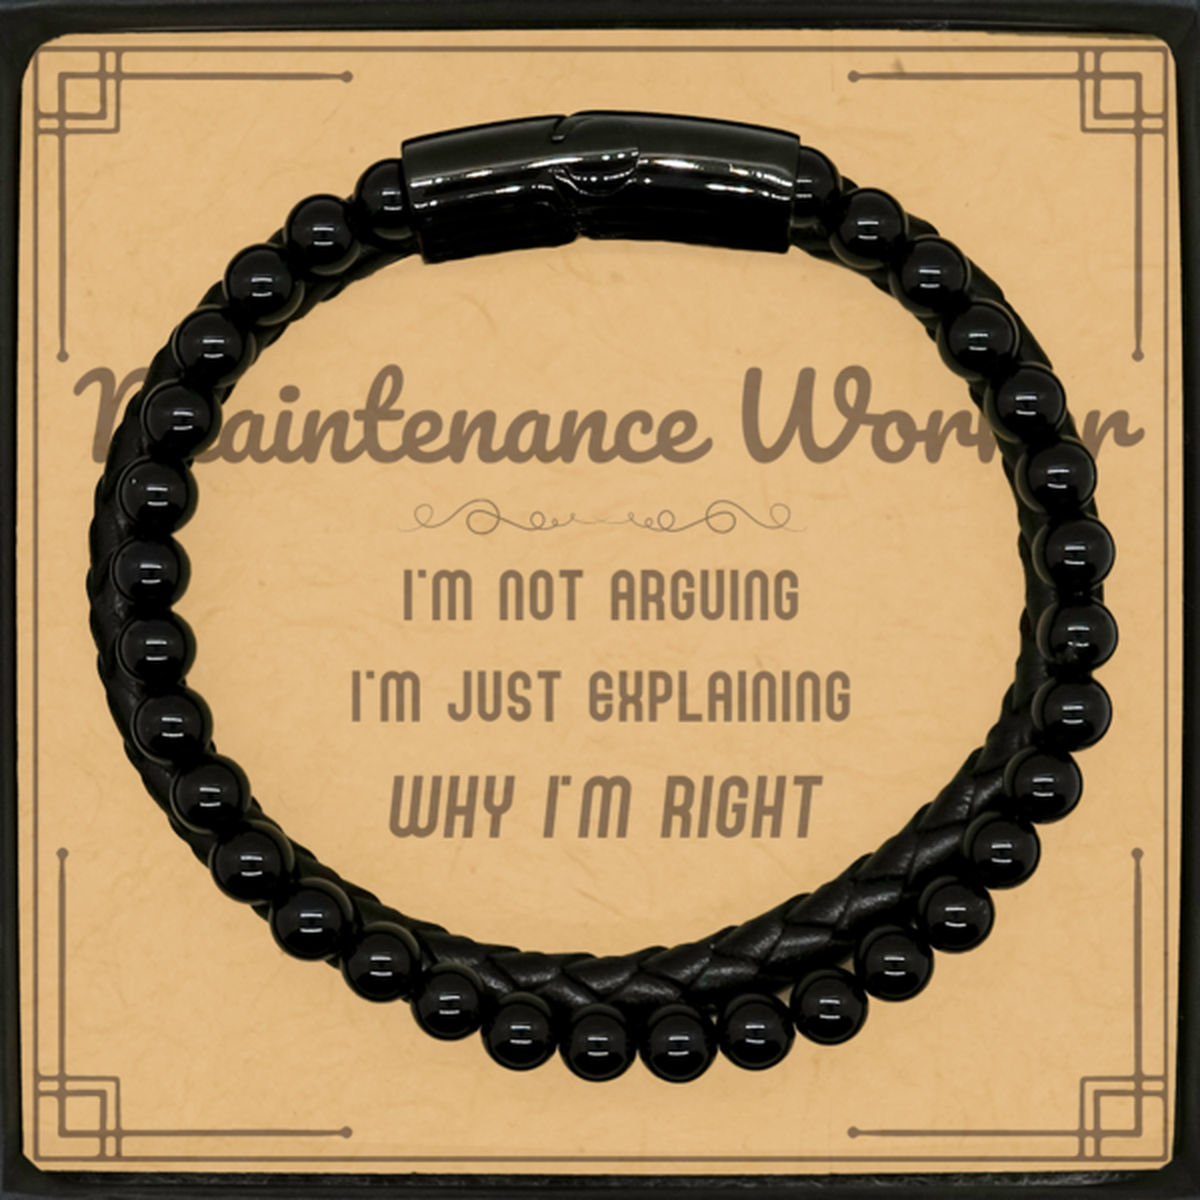 Maintenance Worker I'm not Arguing. I'm Just Explaining Why I'm RIGHT Stone Leather Bracelets, Funny Saying Quote Maintenance Worker Gifts For Maintenance Worker Message Card Graduation Birthday Christmas Gifts for Men Women Coworker